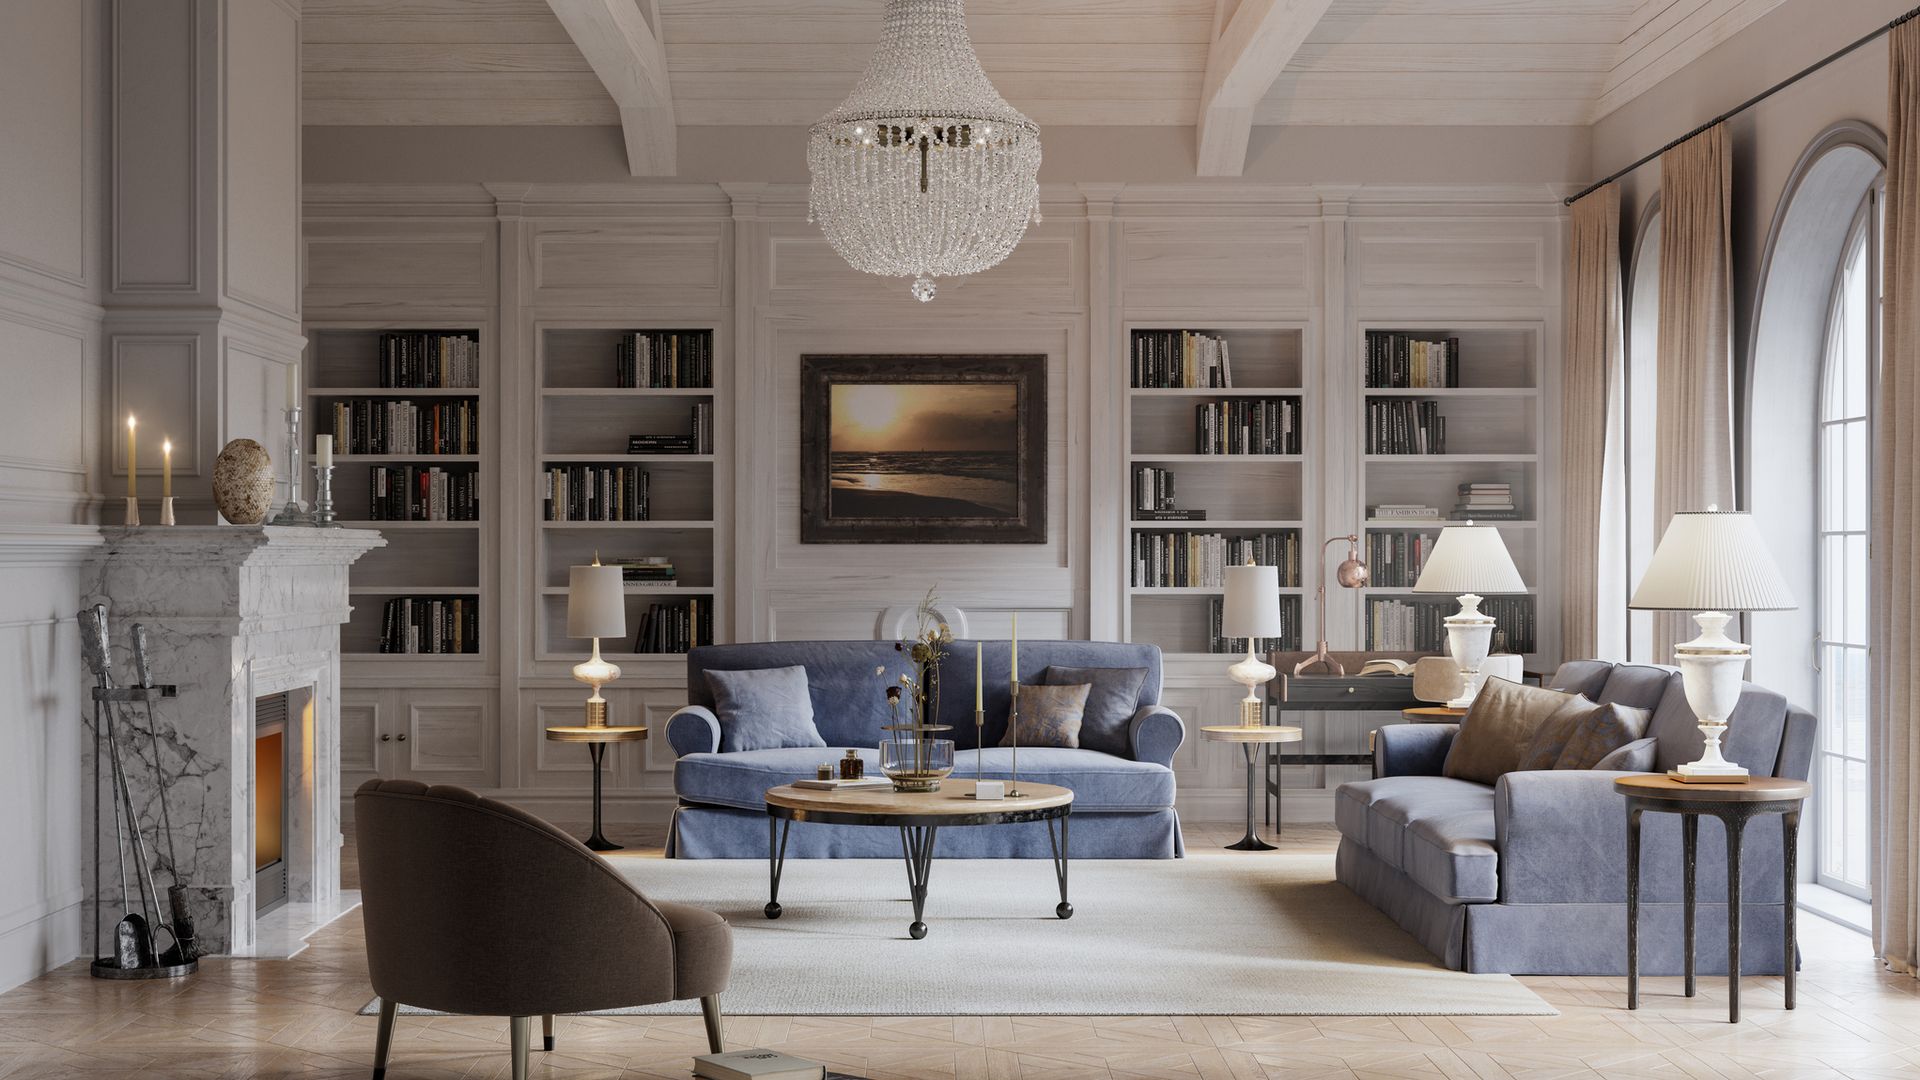 Bookshelf Wealth: The chic interior design trend everyone can try at home